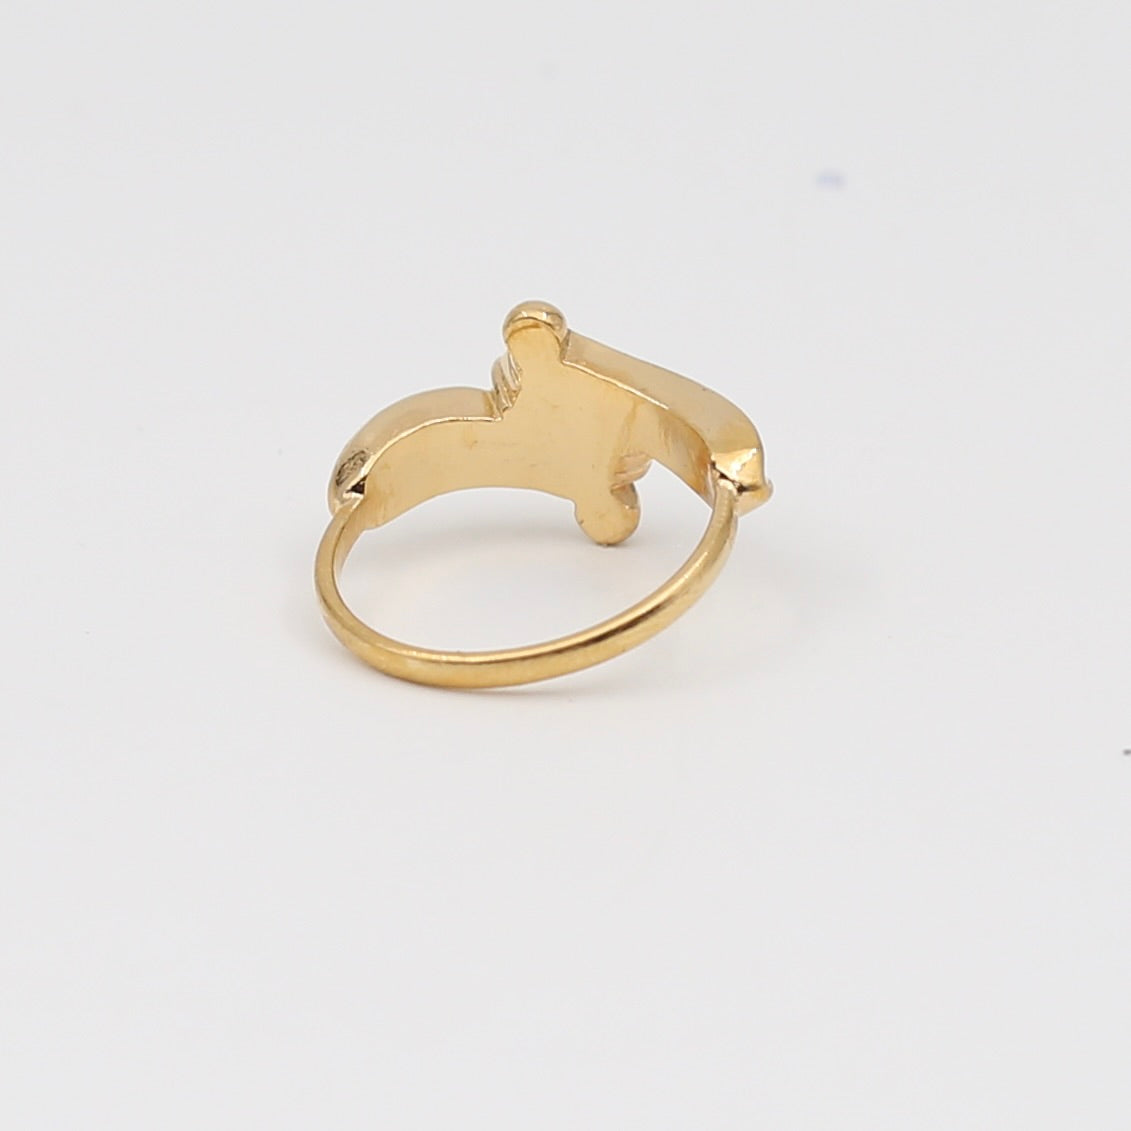 Costume gold colored ring